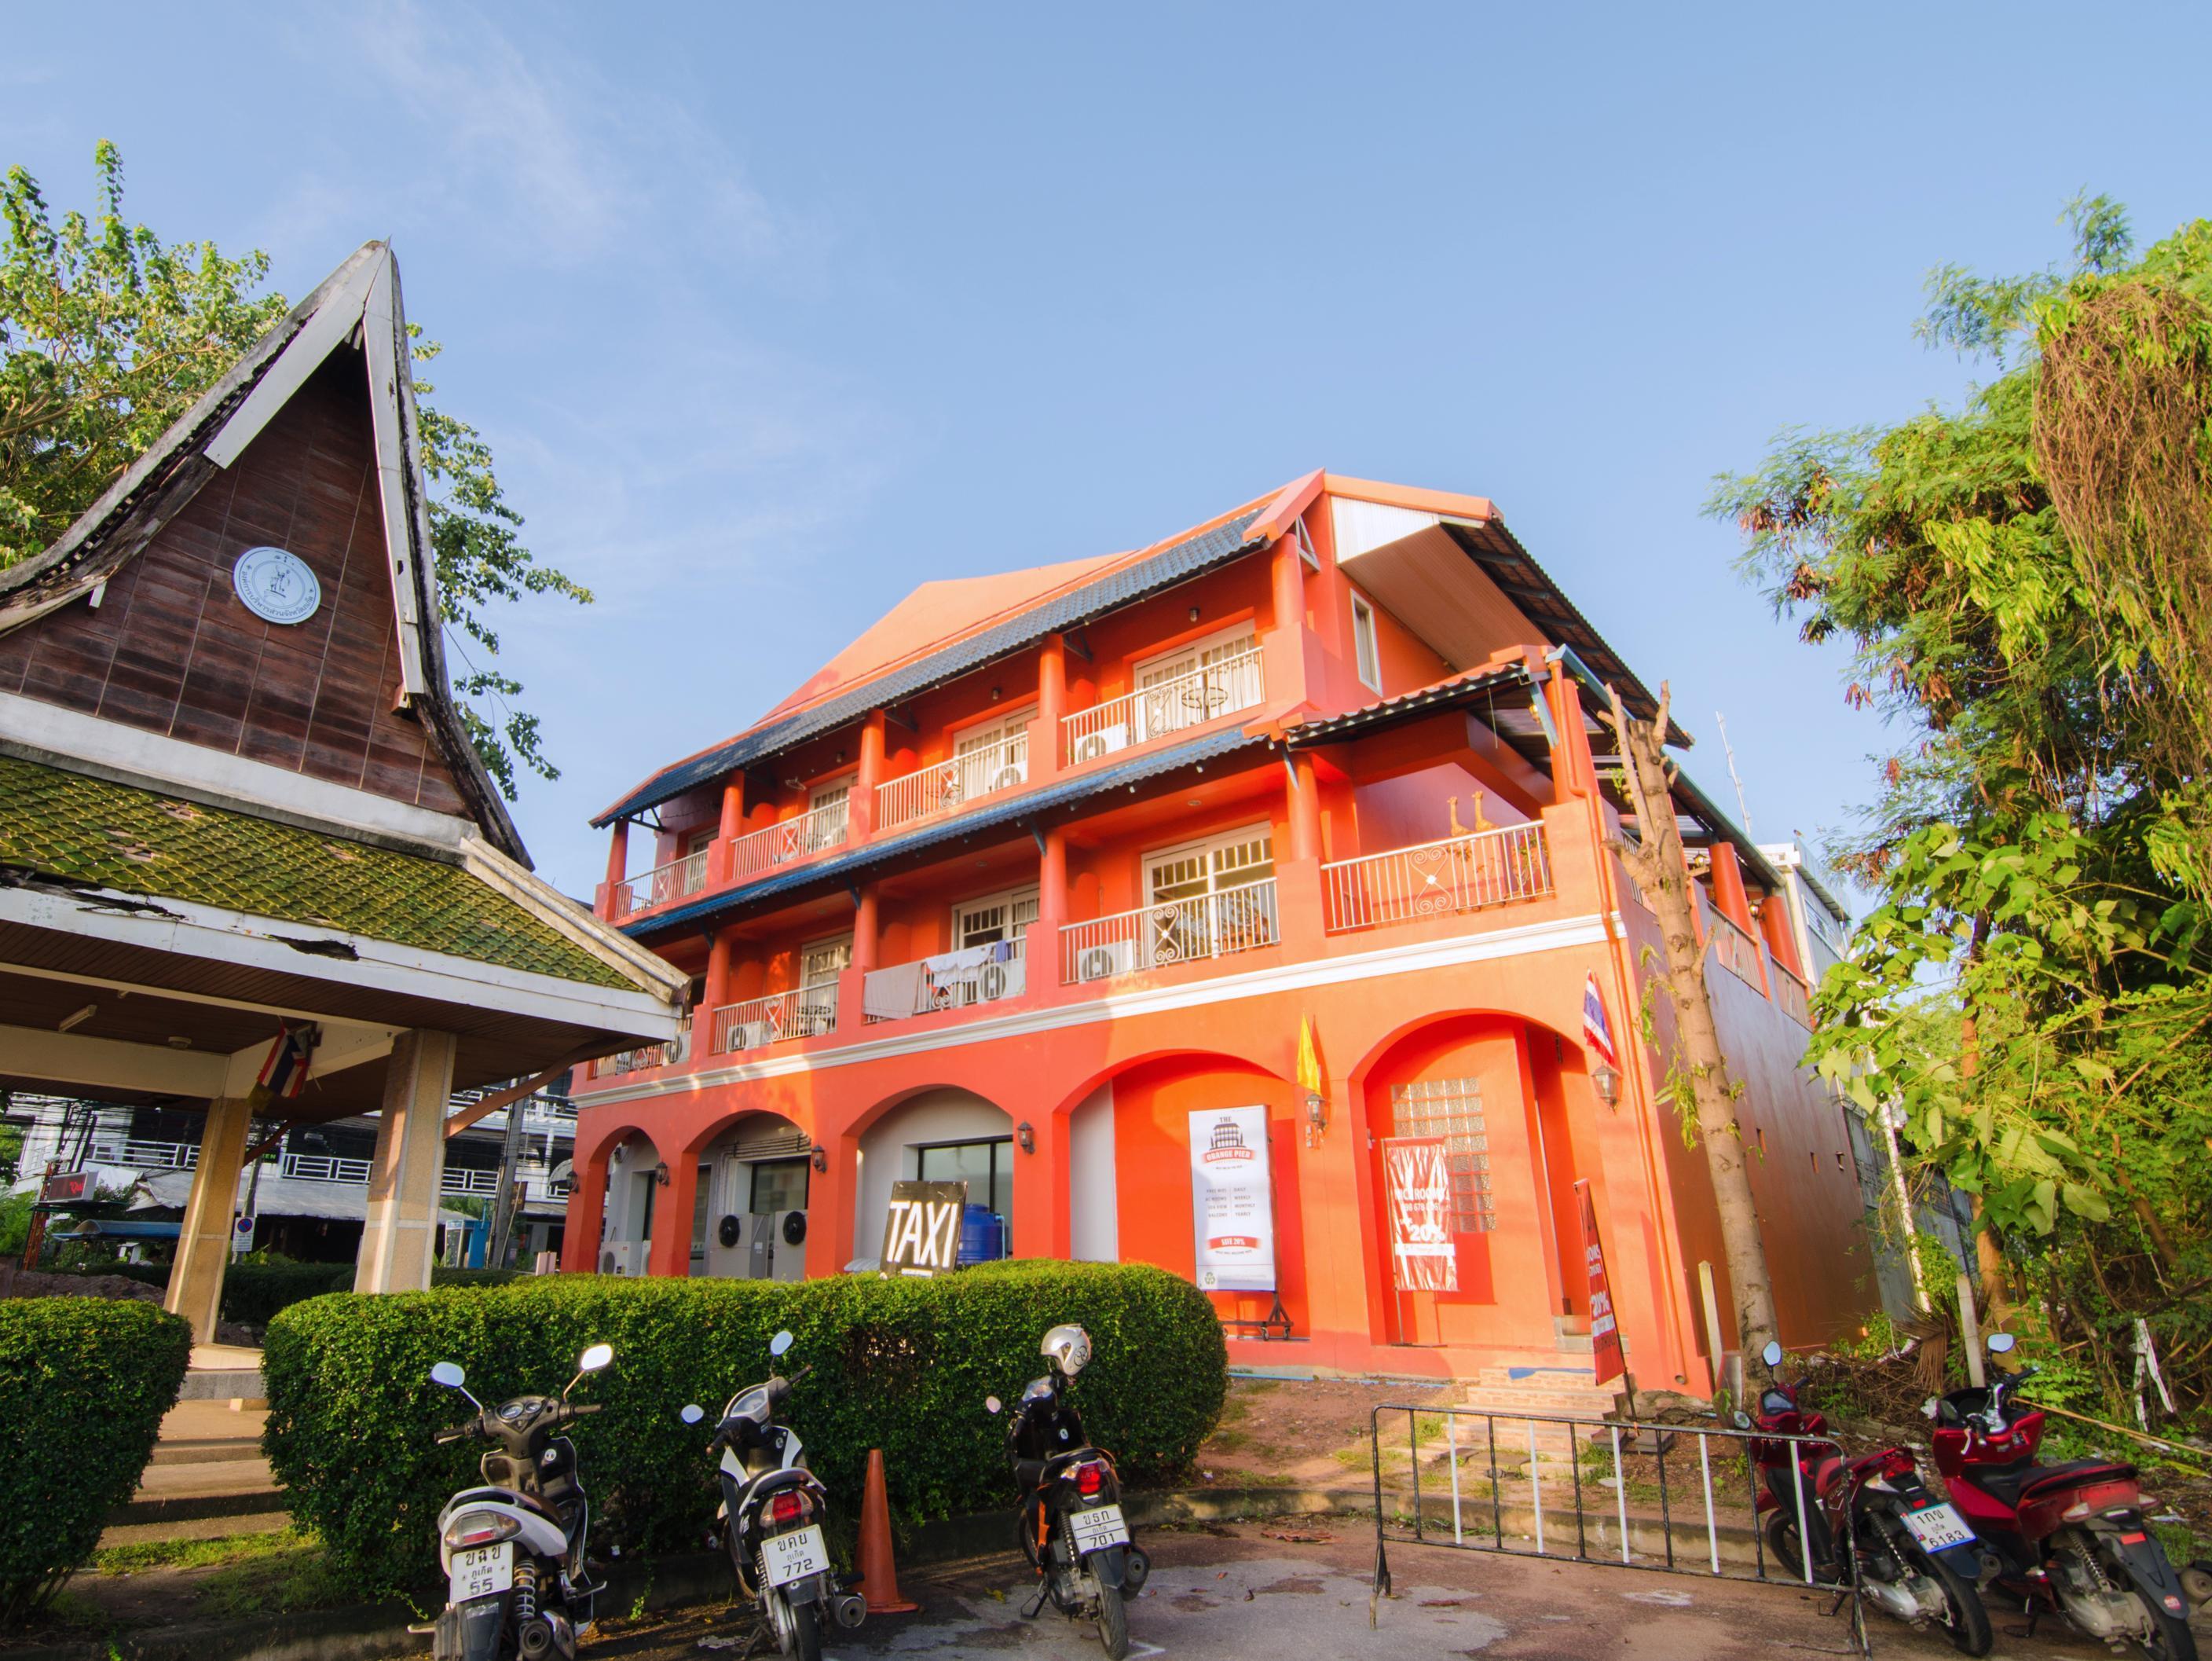 The Orange Pier Guesthouse Thailand FAQ 2016, What facilities are there in The Orange Pier Guesthouse Thailand 2016, What Languages Spoken are Supported in The Orange Pier Guesthouse Thailand 2016, Which payment cards are accepted in The Orange Pier Guesthouse Thailand , Thailand The Orange Pier Guesthouse room facilities and services Q&A 2016, Thailand The Orange Pier Guesthouse online booking services 2016, Thailand The Orange Pier Guesthouse address 2016, Thailand The Orange Pier Guesthouse telephone number 2016,Thailand The Orange Pier Guesthouse map 2016, Thailand The Orange Pier Guesthouse traffic guide 2016, how to go Thailand The Orange Pier Guesthouse, Thailand The Orange Pier Guesthouse booking online 2016, Thailand The Orange Pier Guesthouse room types 2016.